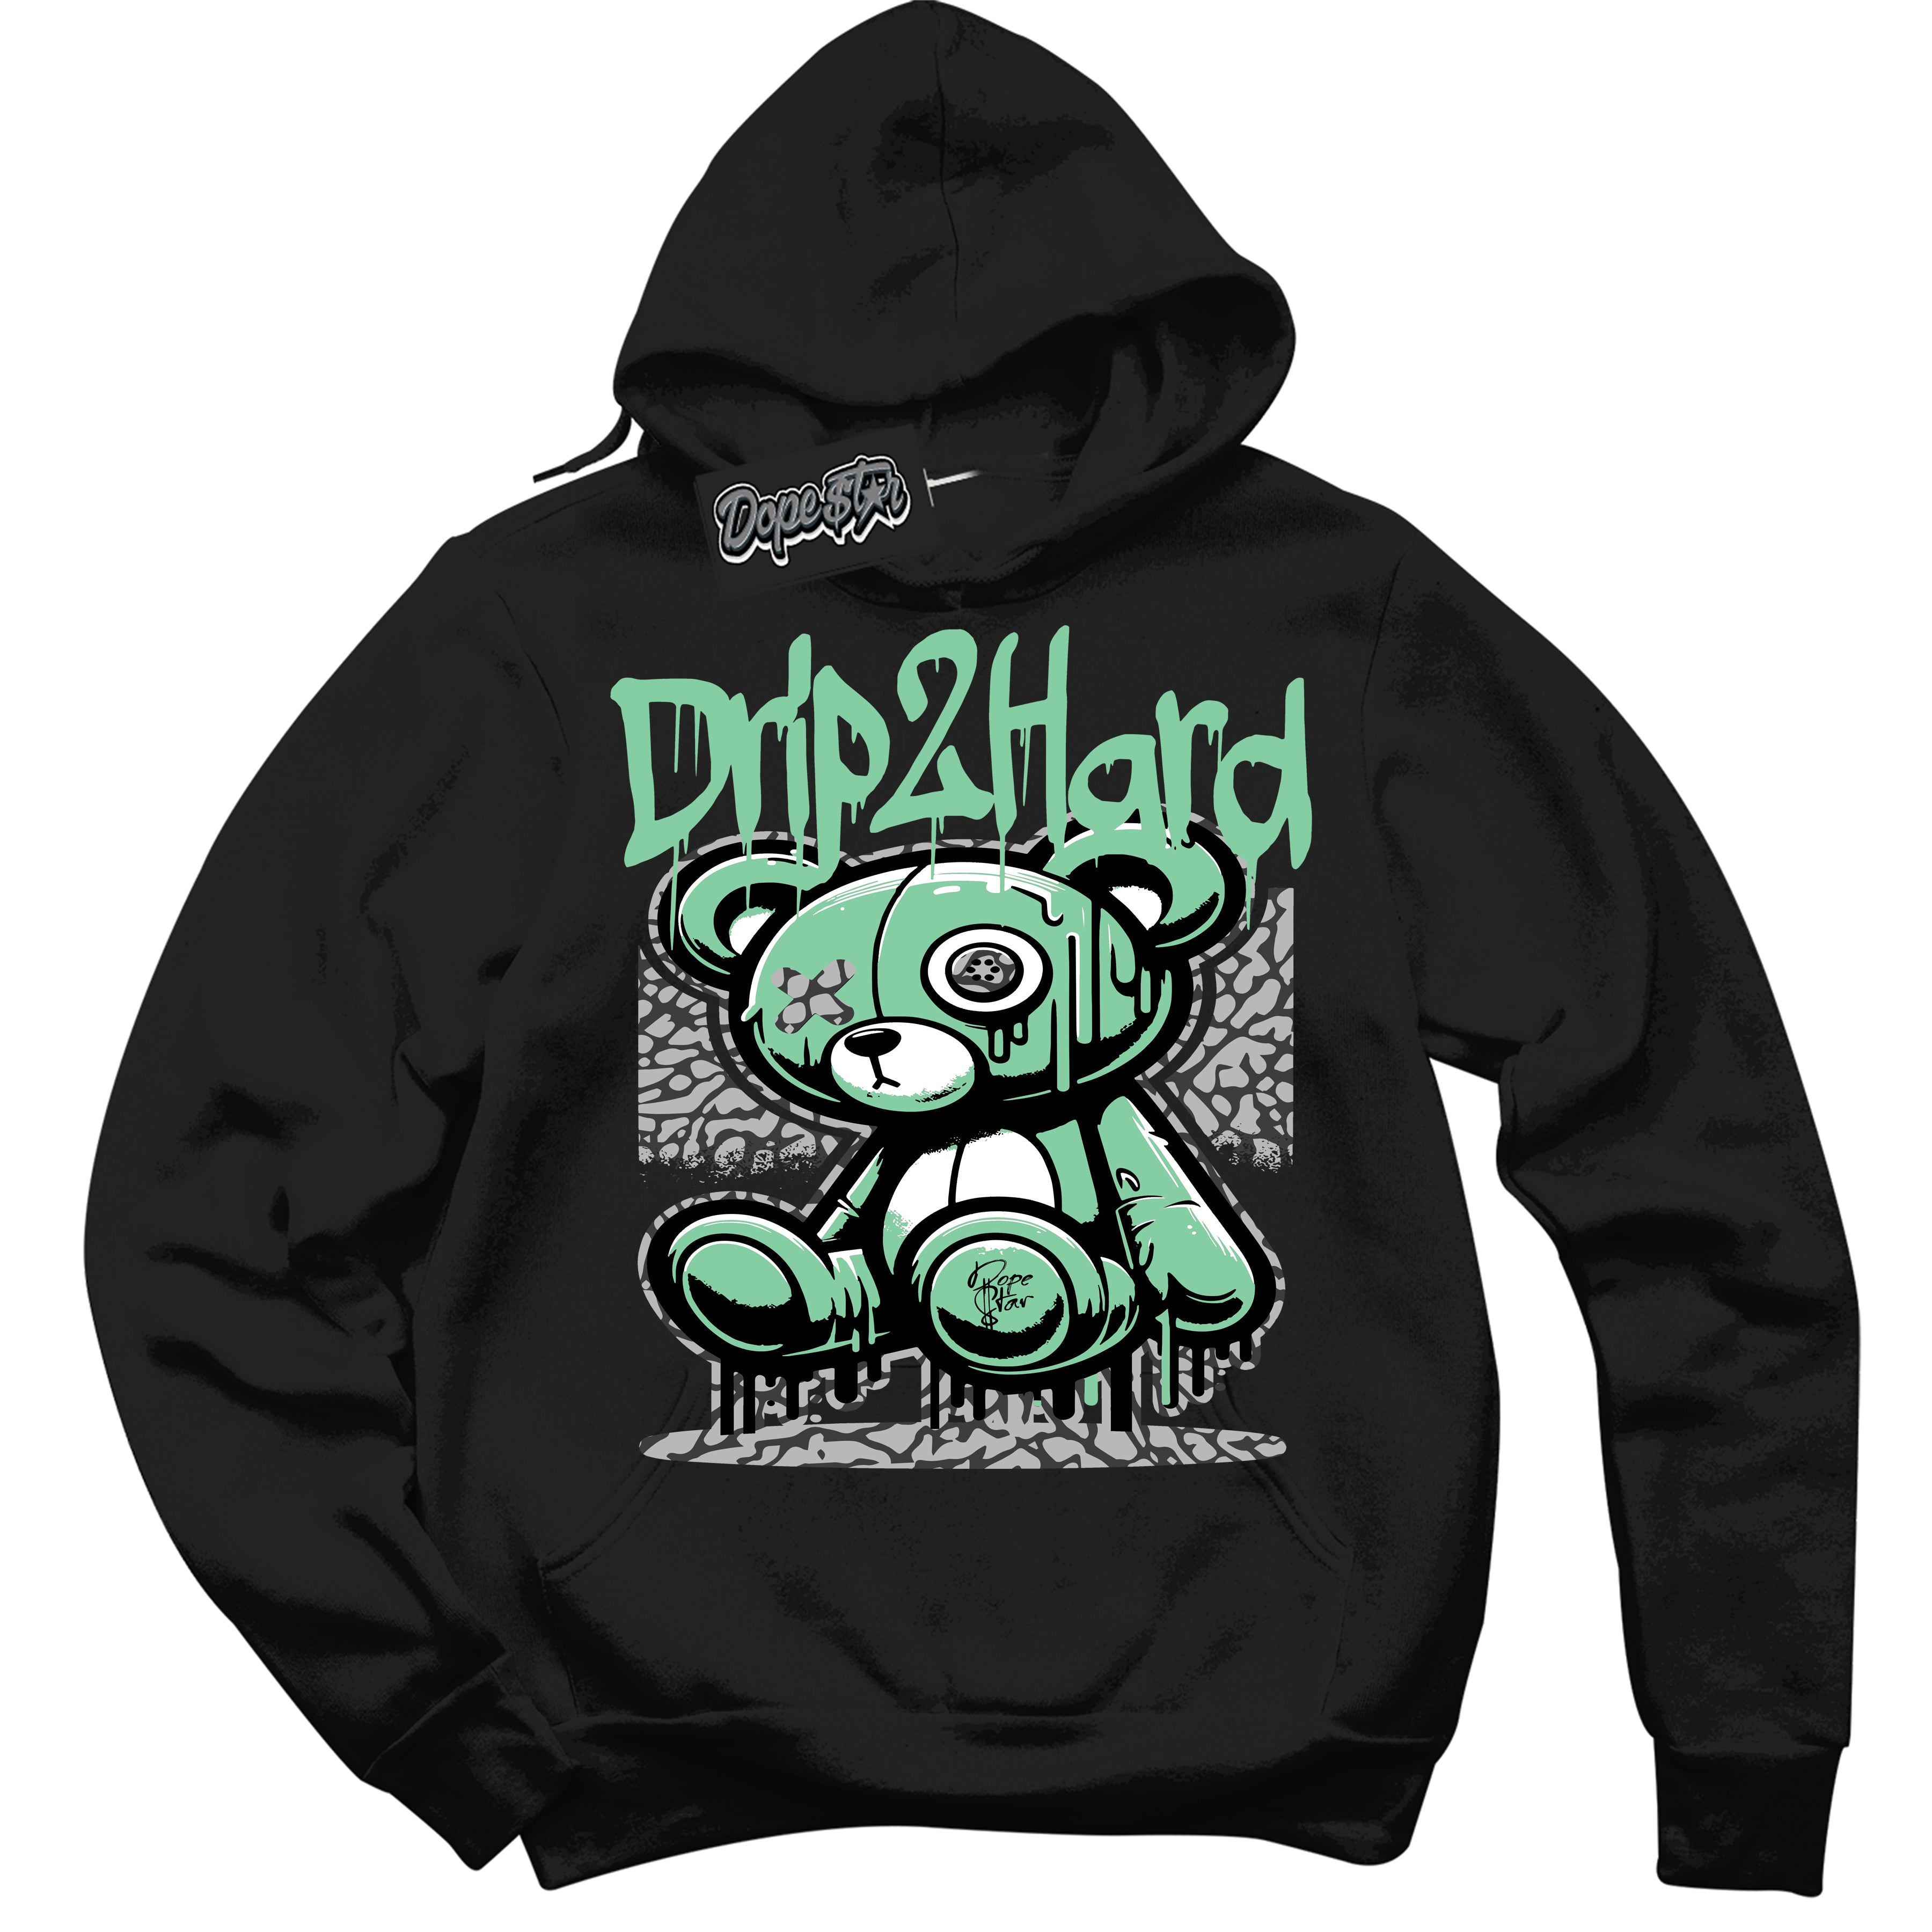 Cool Black Graphic DopeStar Hoodie with “ Drip 2 Hard “ print, that perfectly matches Green Glow 3S sneakers